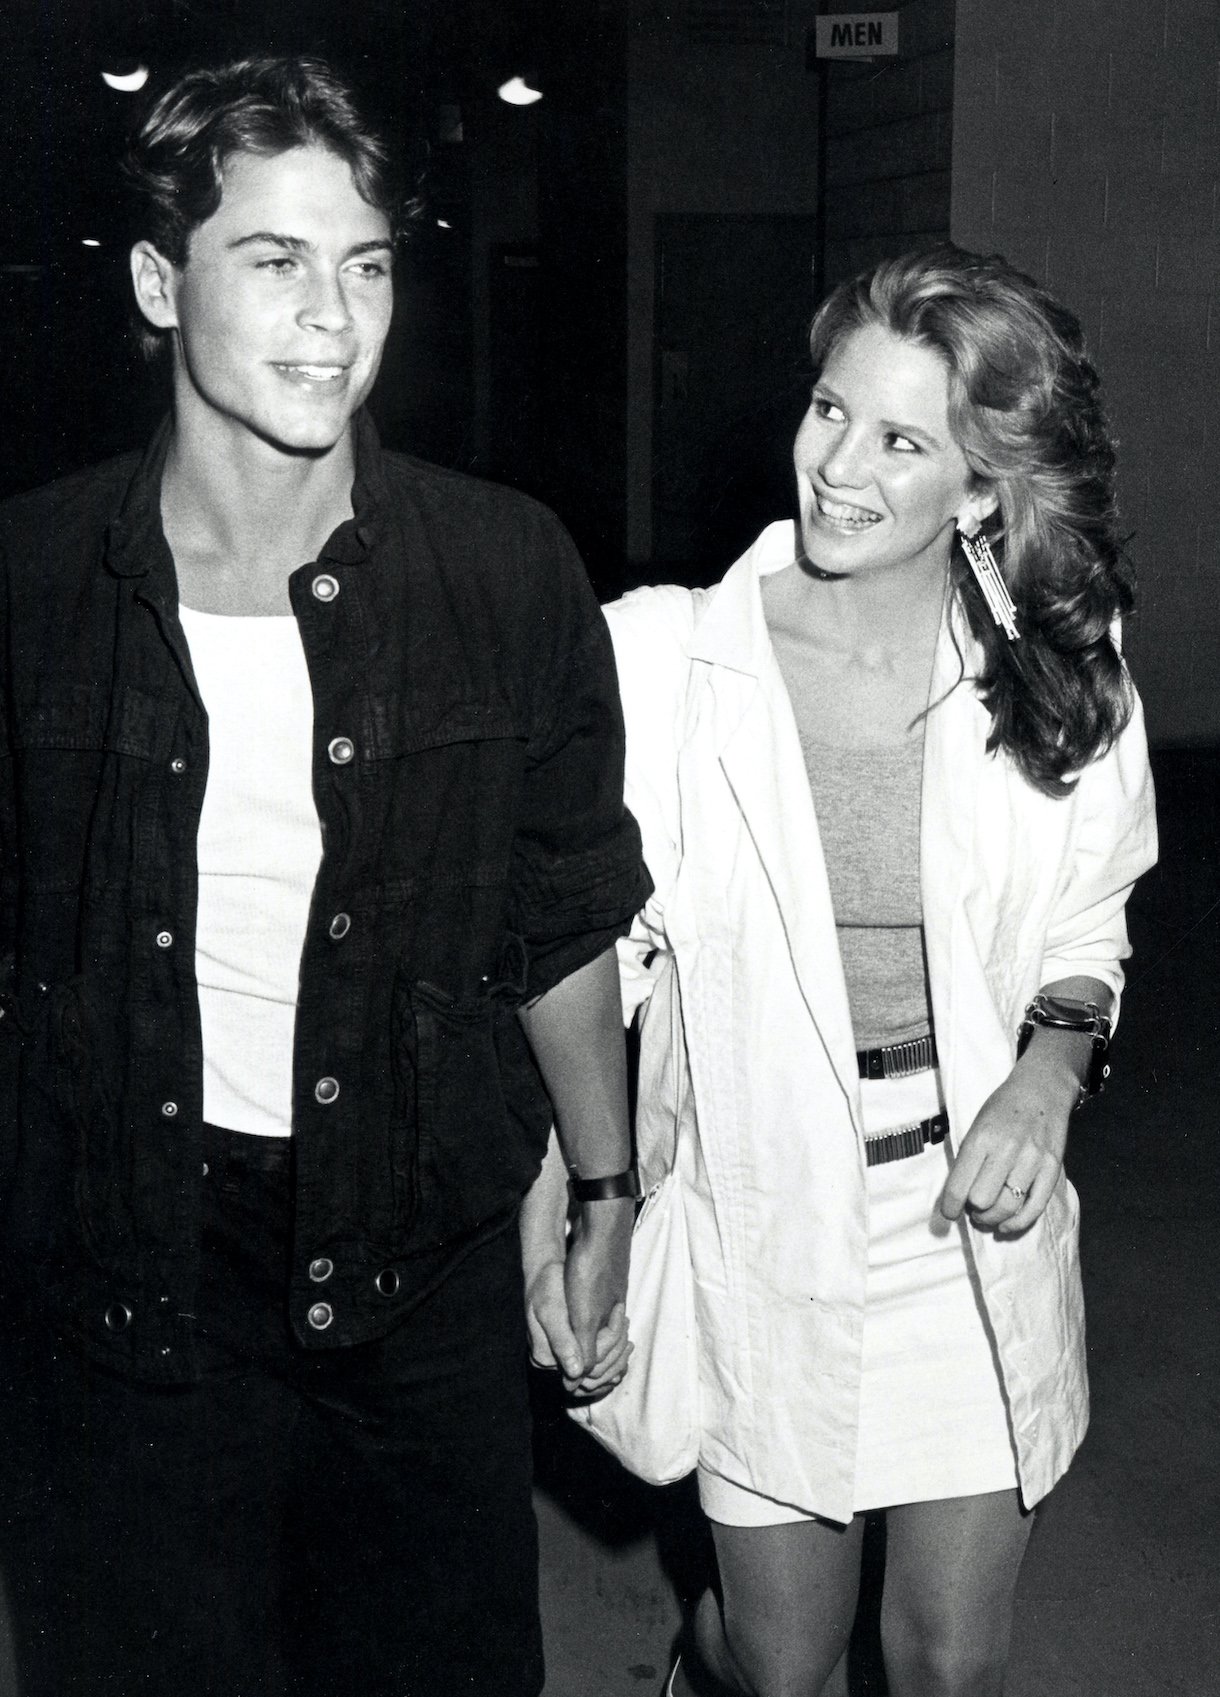 Rob Lowe and Melissa Gilbert in 1983